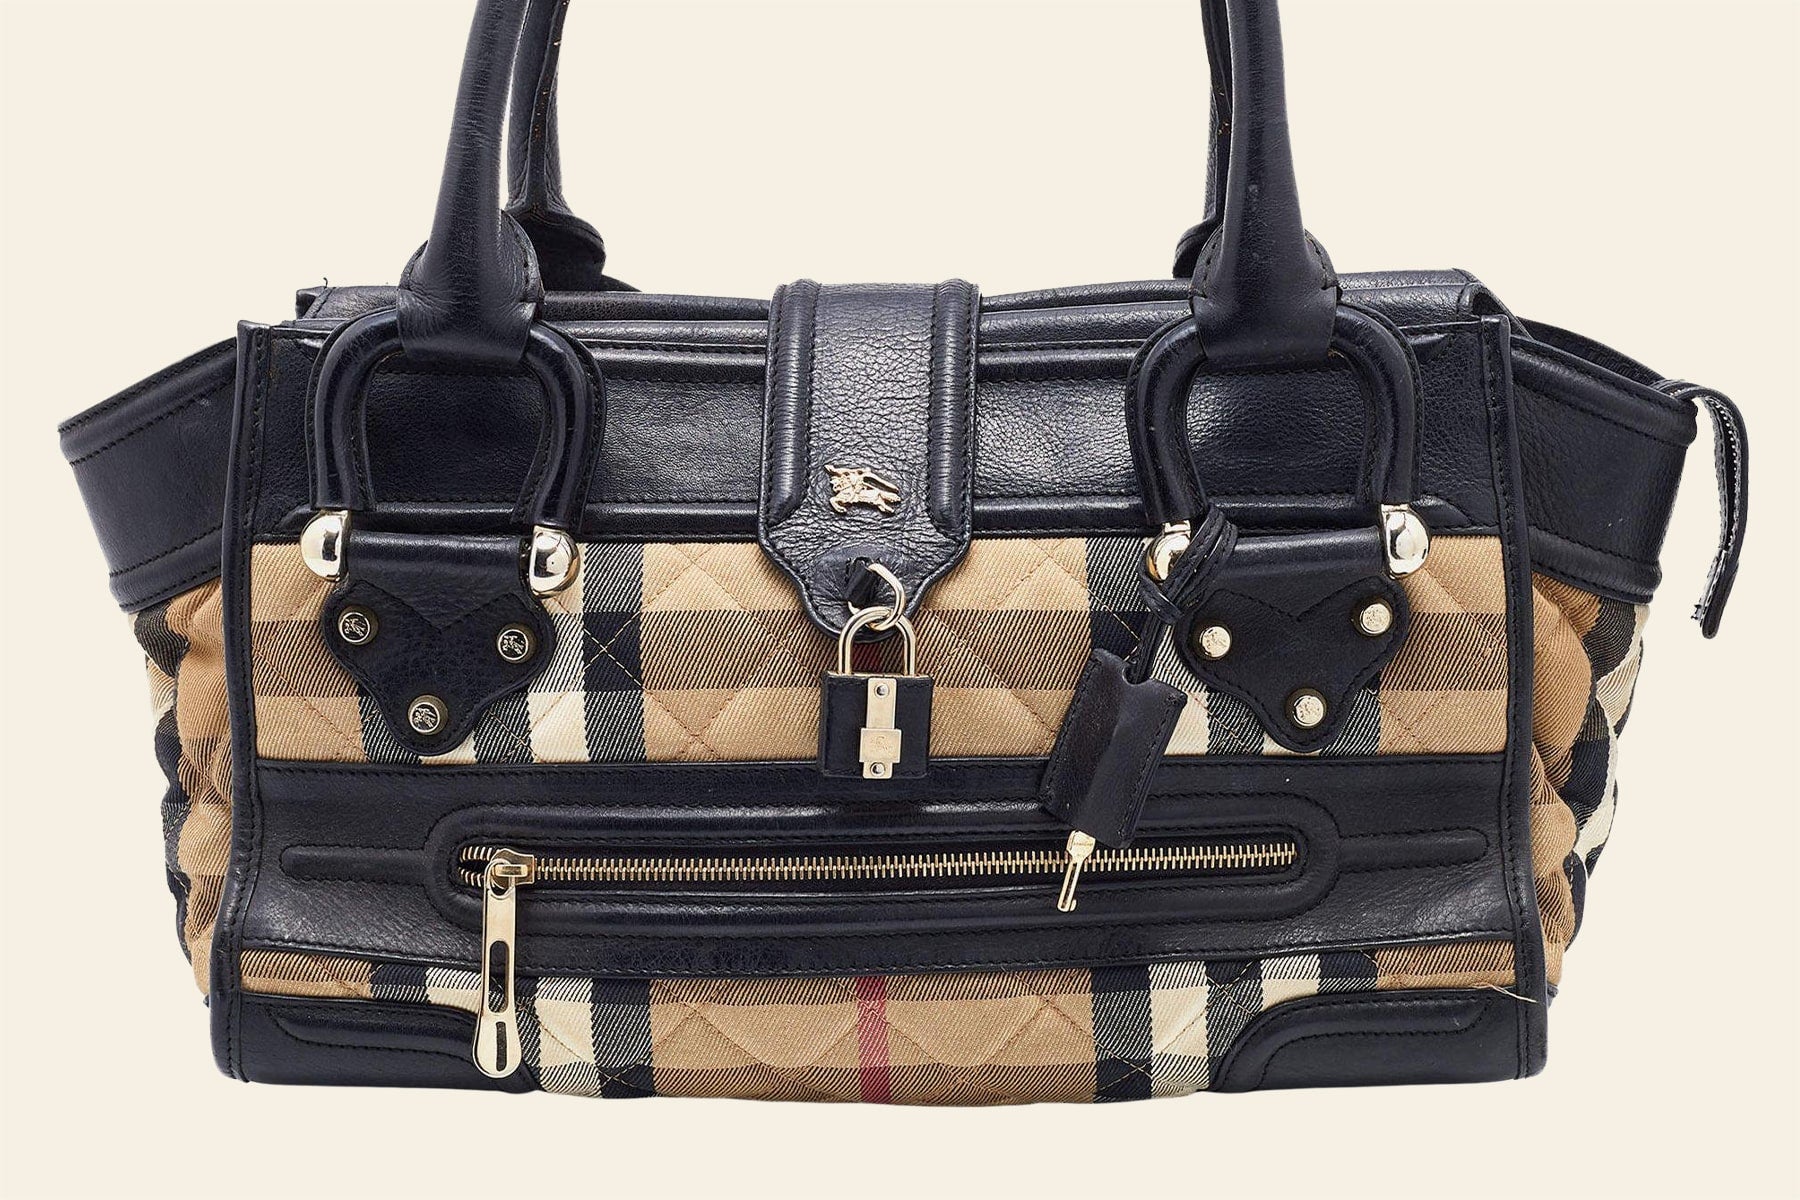 How to Tell If Your Burberry Coat or Bag Is Authentic